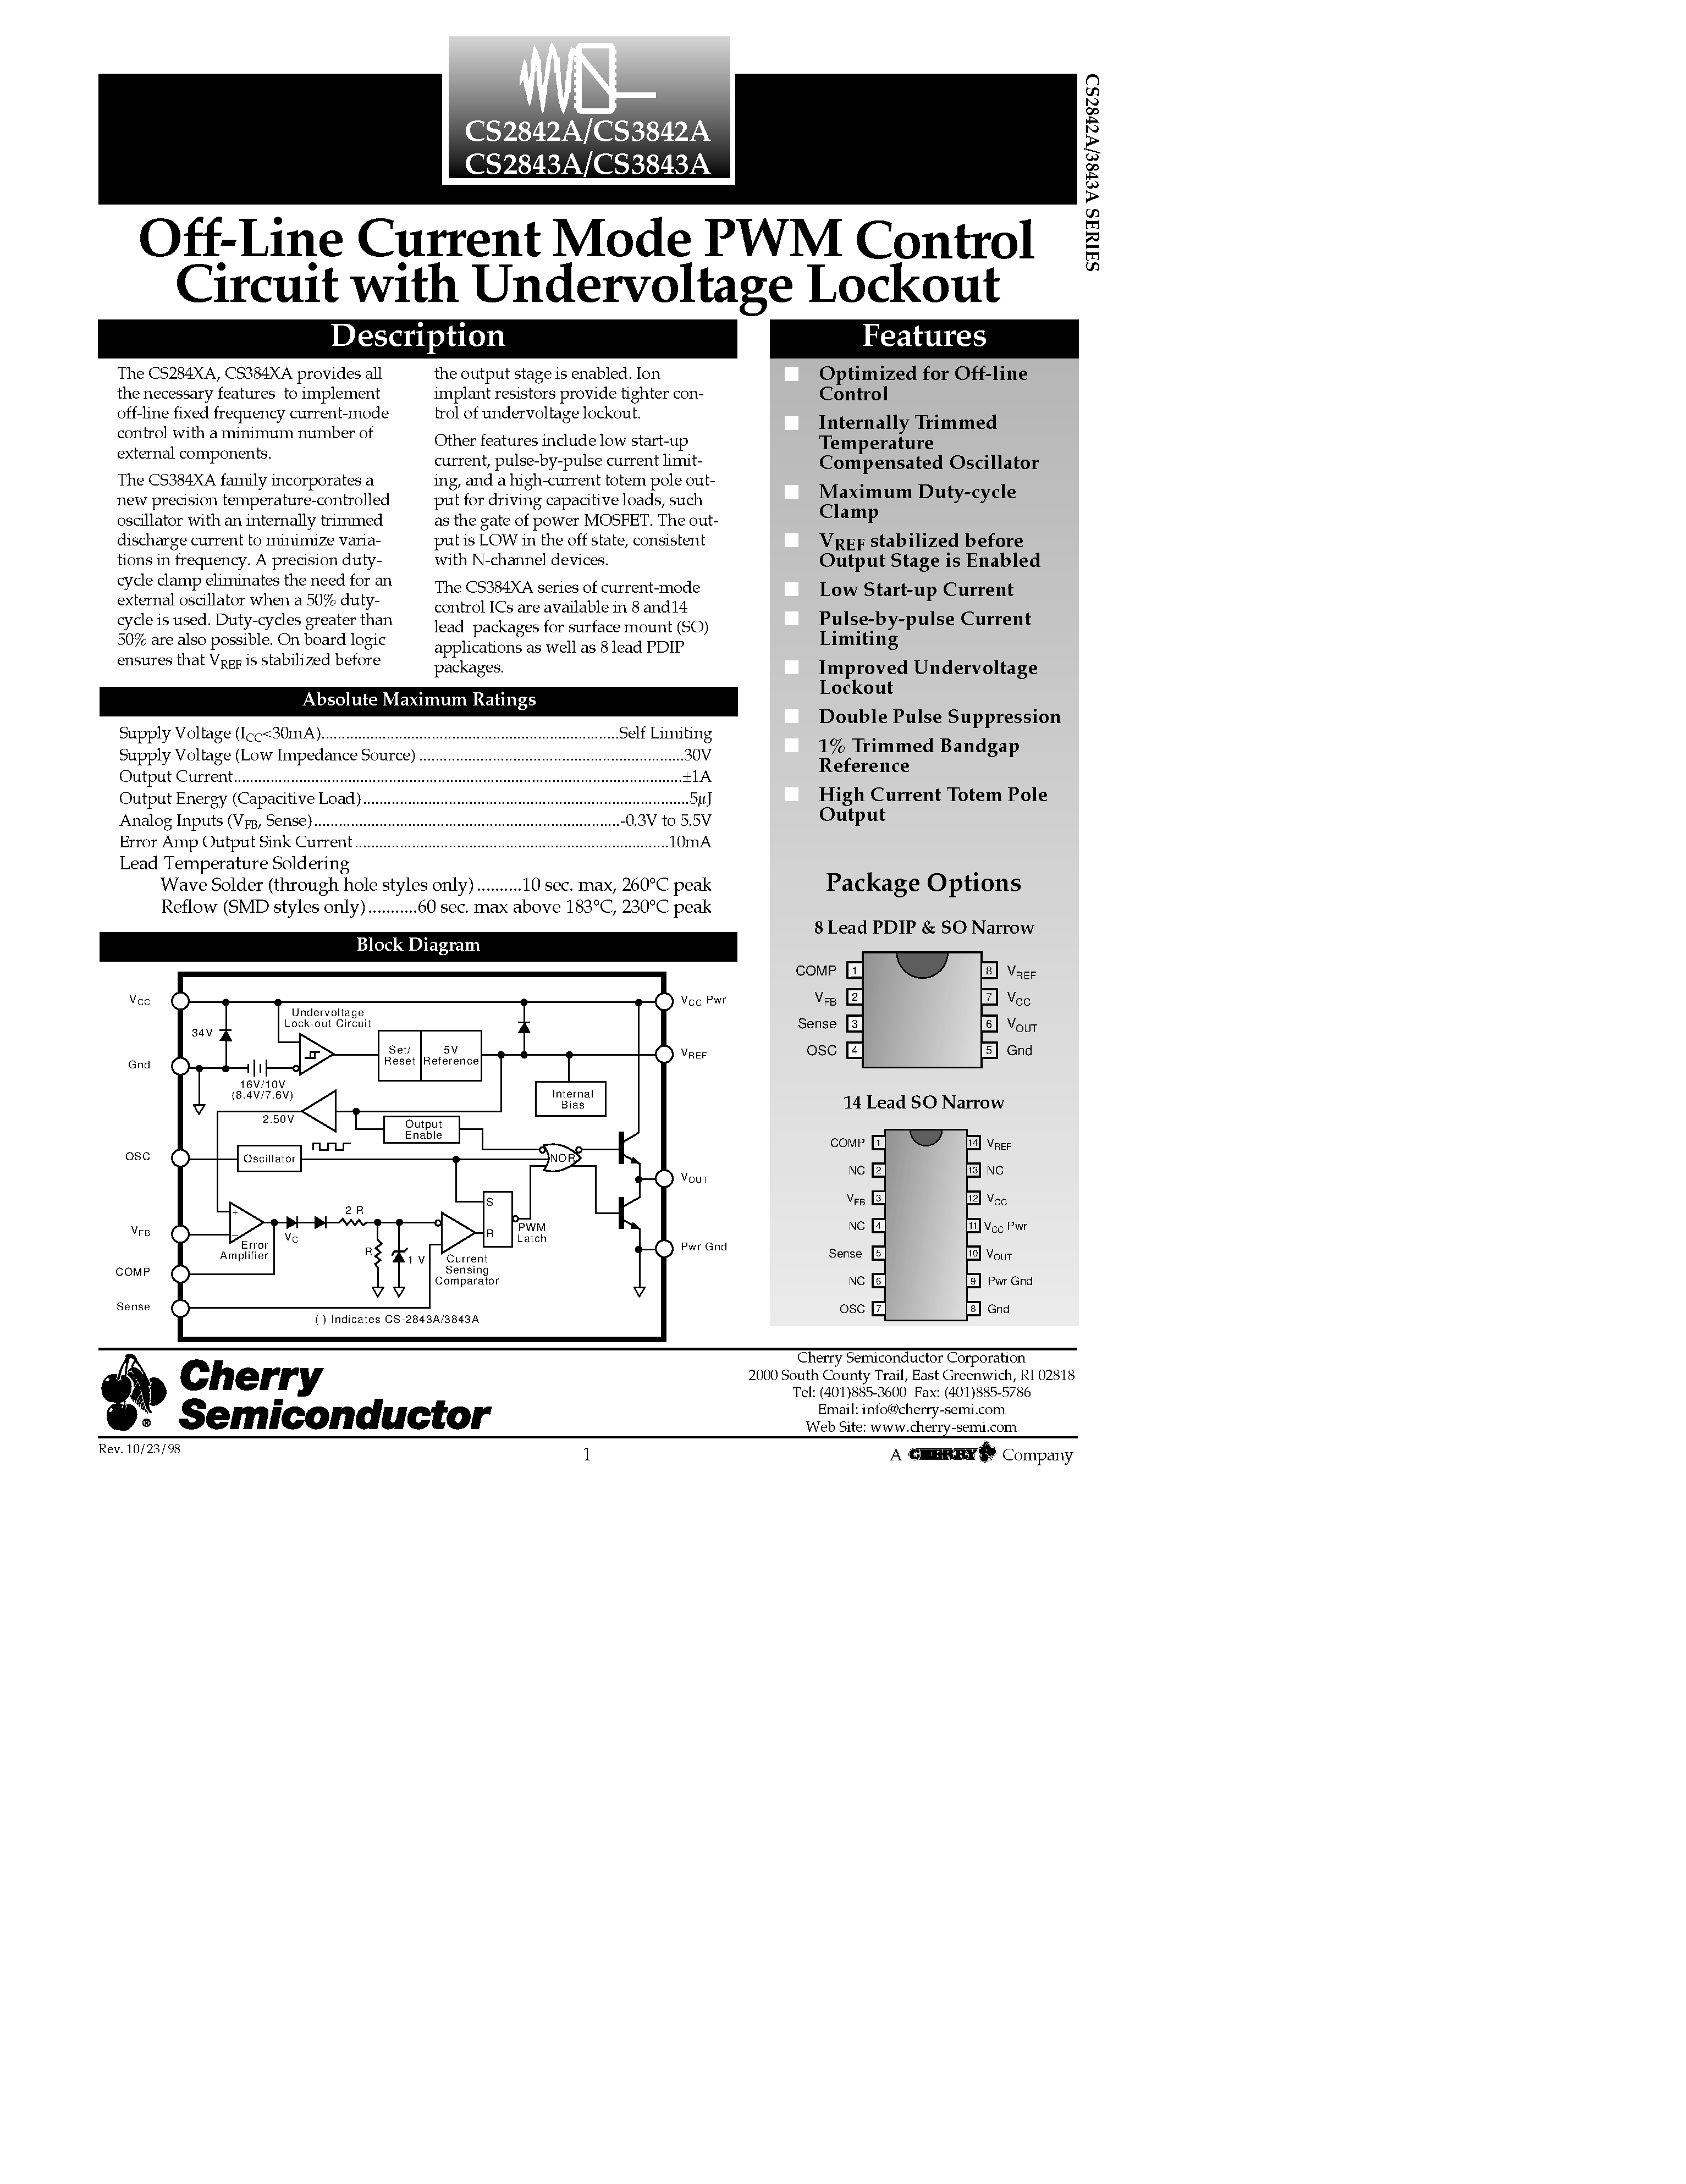 Datasheet CS2843ALDR14 - Off-Line Current Mode PWM Control Circuit with Undervoltage Lockout page 1